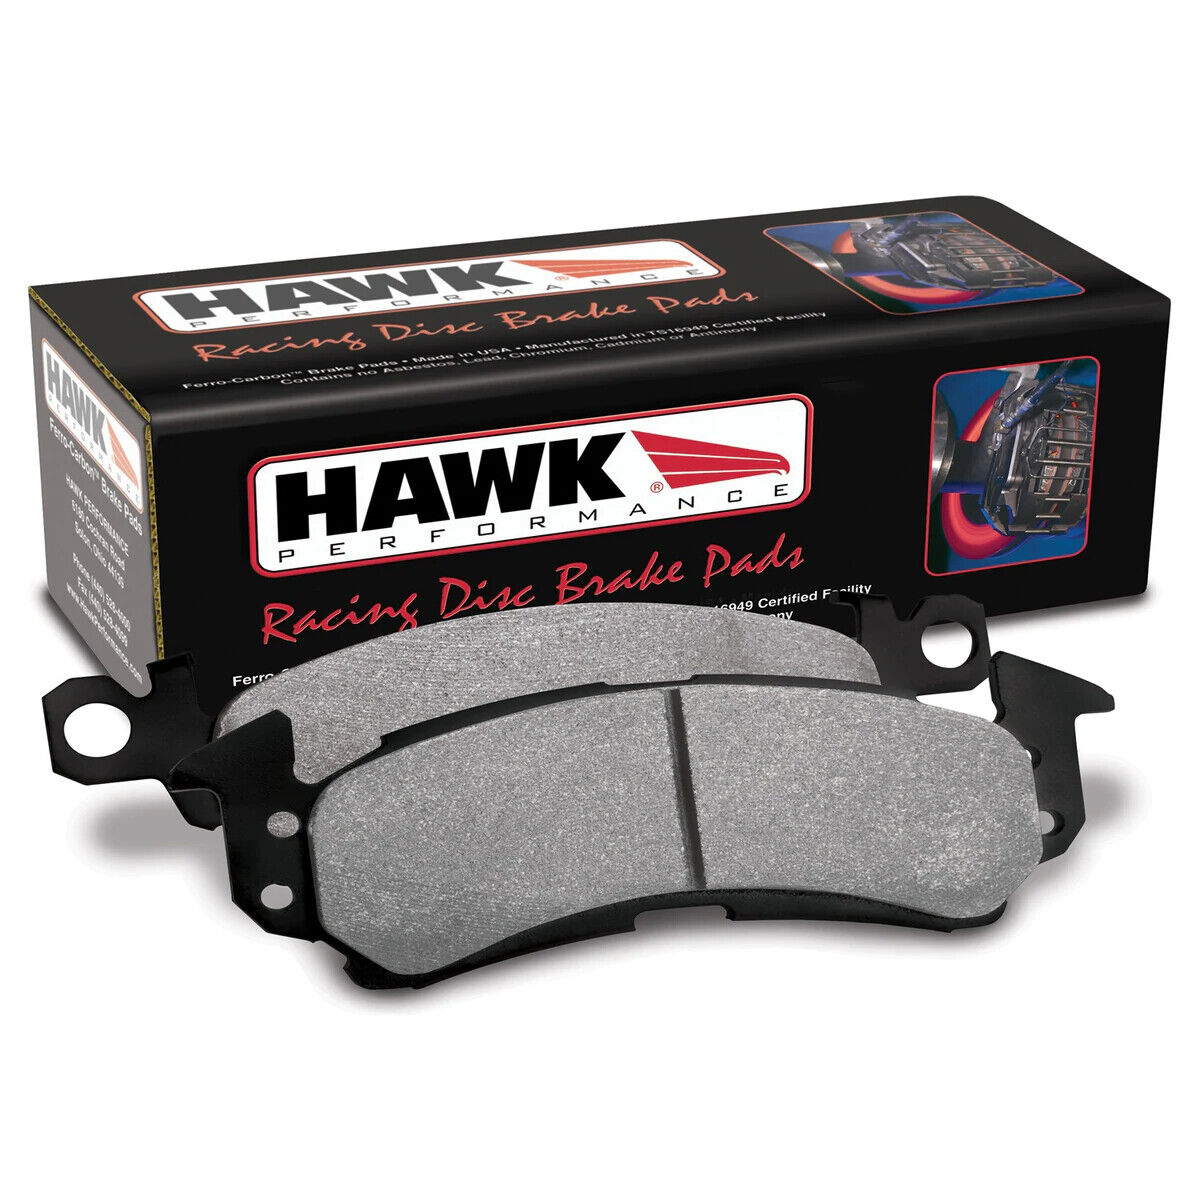 Hawk-Blue 9012 Rear Brake Pads for Acura NSX-15mm-HB185E.590 BLOWOUT PRICING